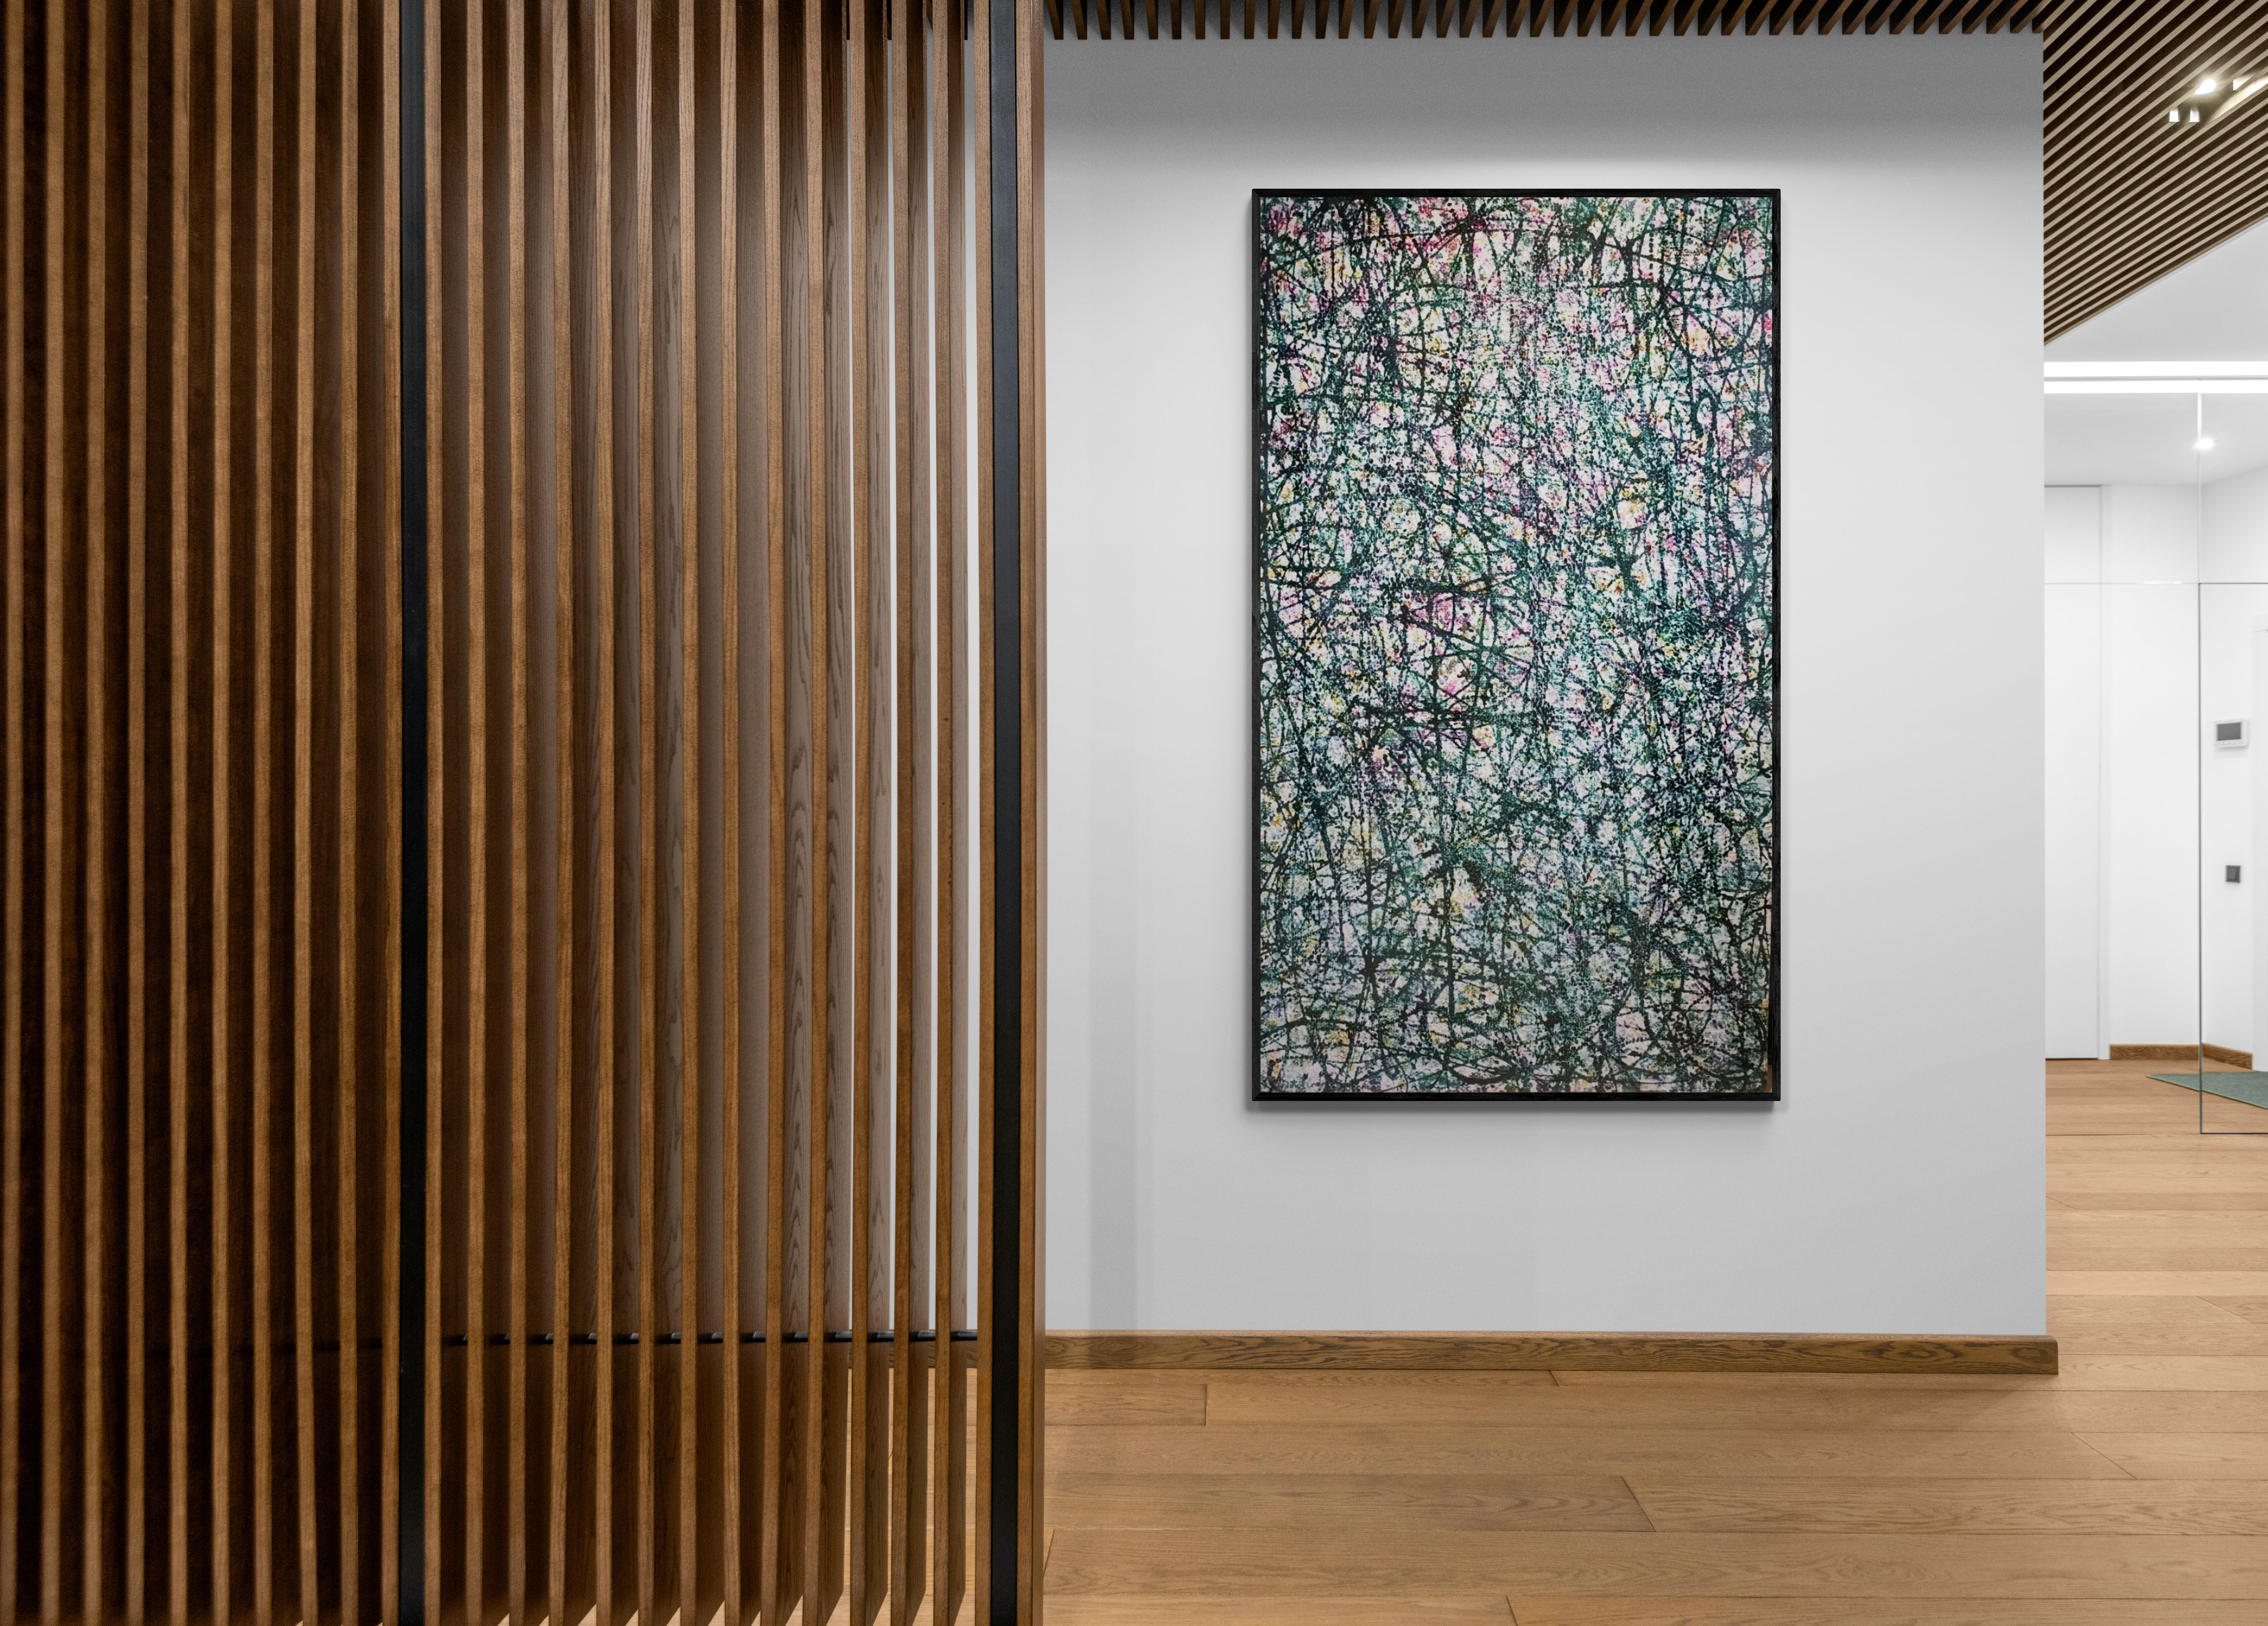 Very beautiful contemporary painting, abstract in the style of Jackson Pollock and Larry Poons.
.
Unsigned, unidentified but very beautiful.
.
Superb colors and beautiful materials that are not necessarily seen in the images.
.
Painting on wood 